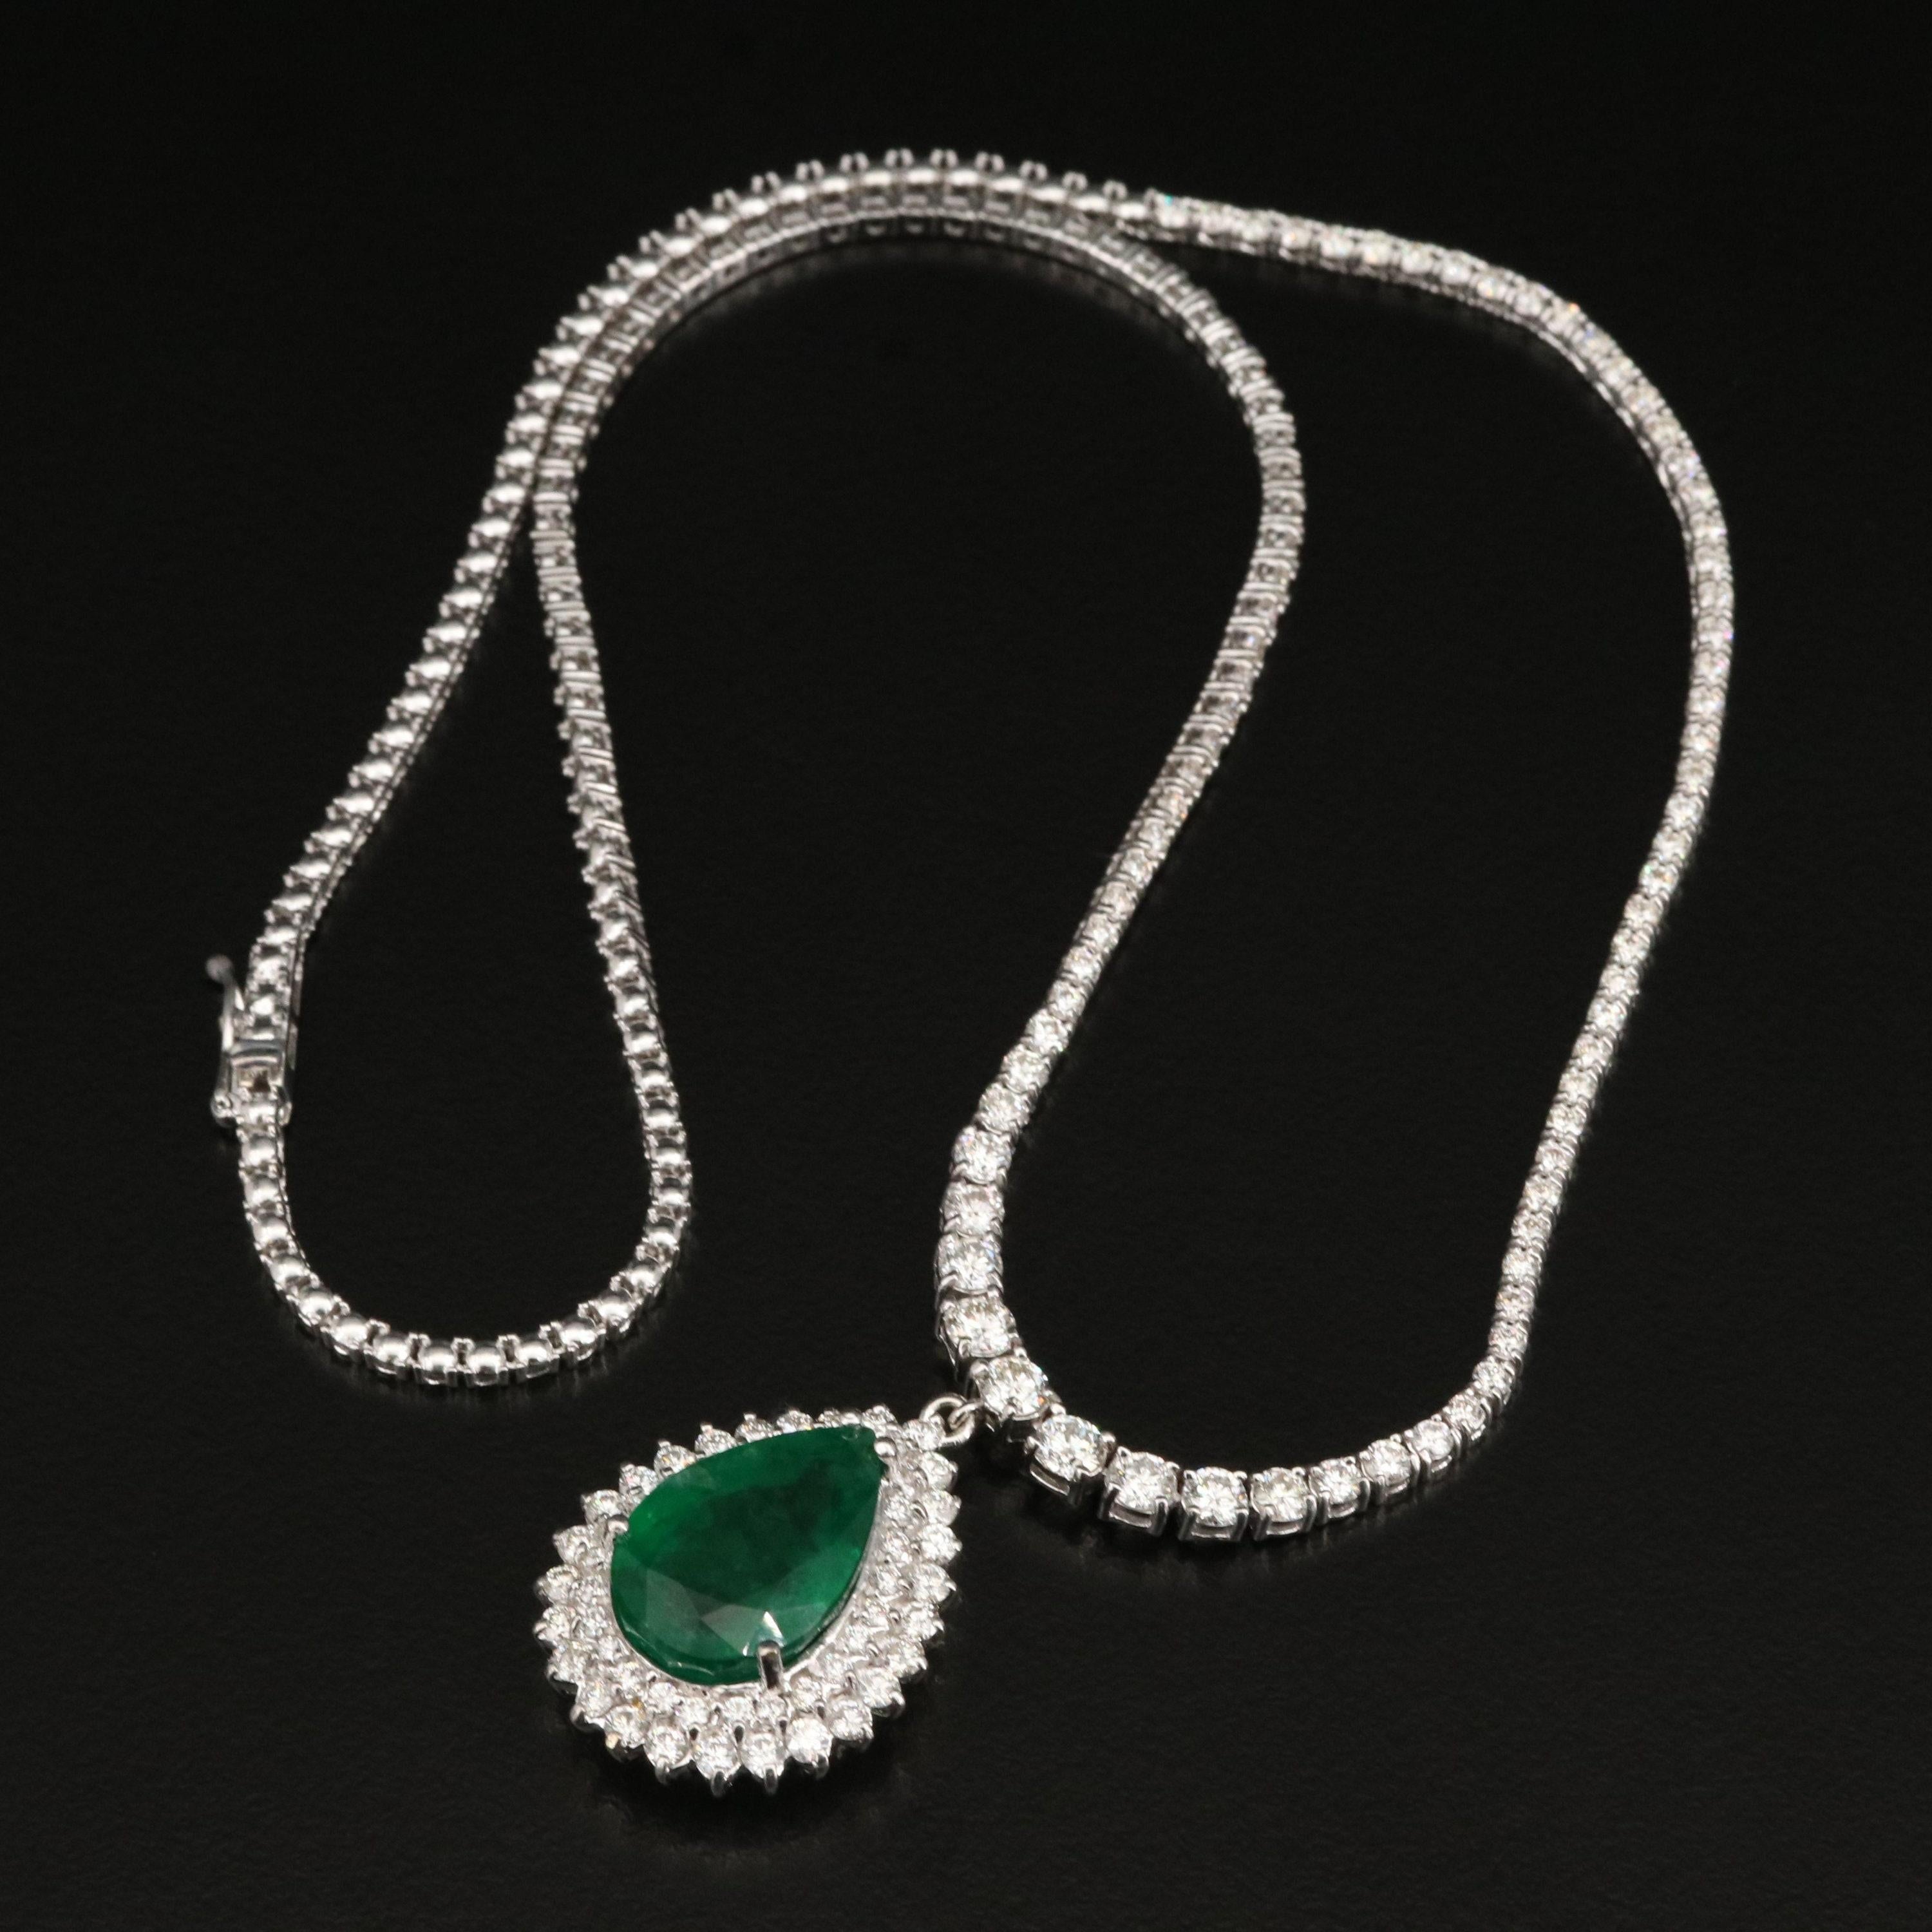 Vintage Pear Cut Emerald Diamonds Pendant Necklace, Unique Natural Emerald Diamond Necklace, - Emerald Diamond Pendant Necklace 
 
 Item Description
 → Handmade, Made to order
 → Material: SOLID 18K/18K GOLD
 
 
 Stone Details
 
 → Primary Stone(s)